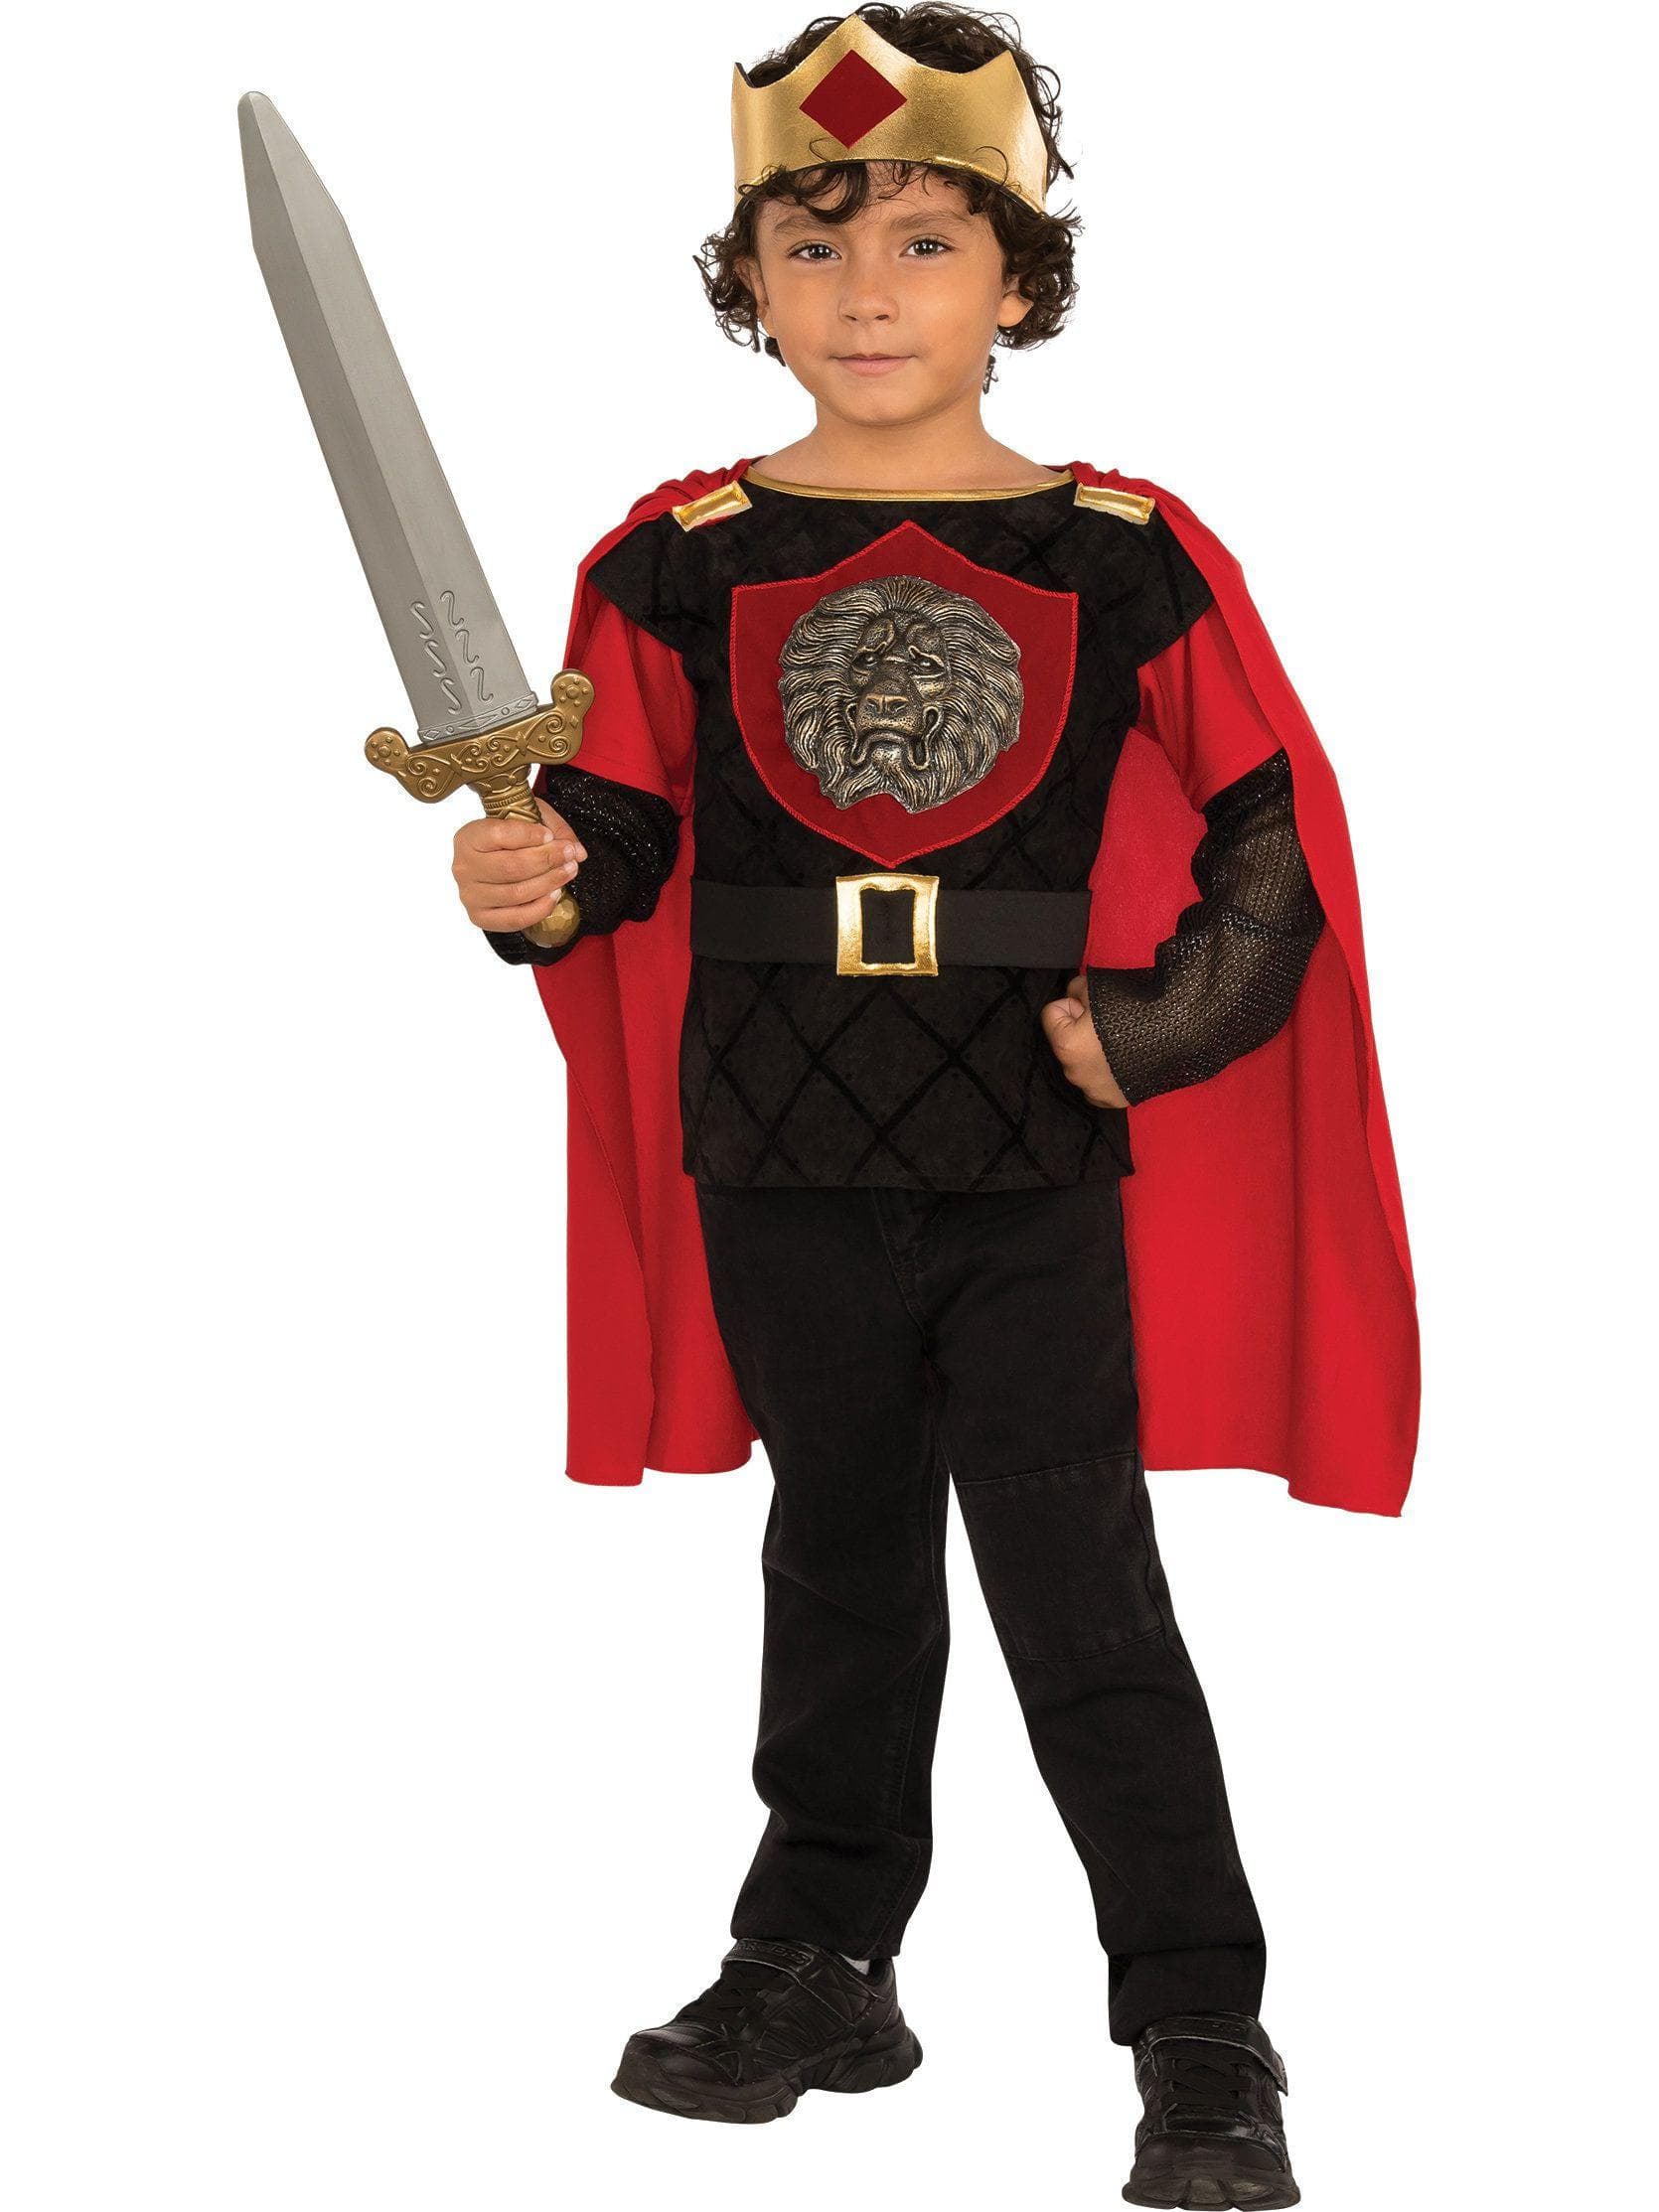 Kids' Black and Red Little Knight Caped Shirt and Gold Crown - costumes.com